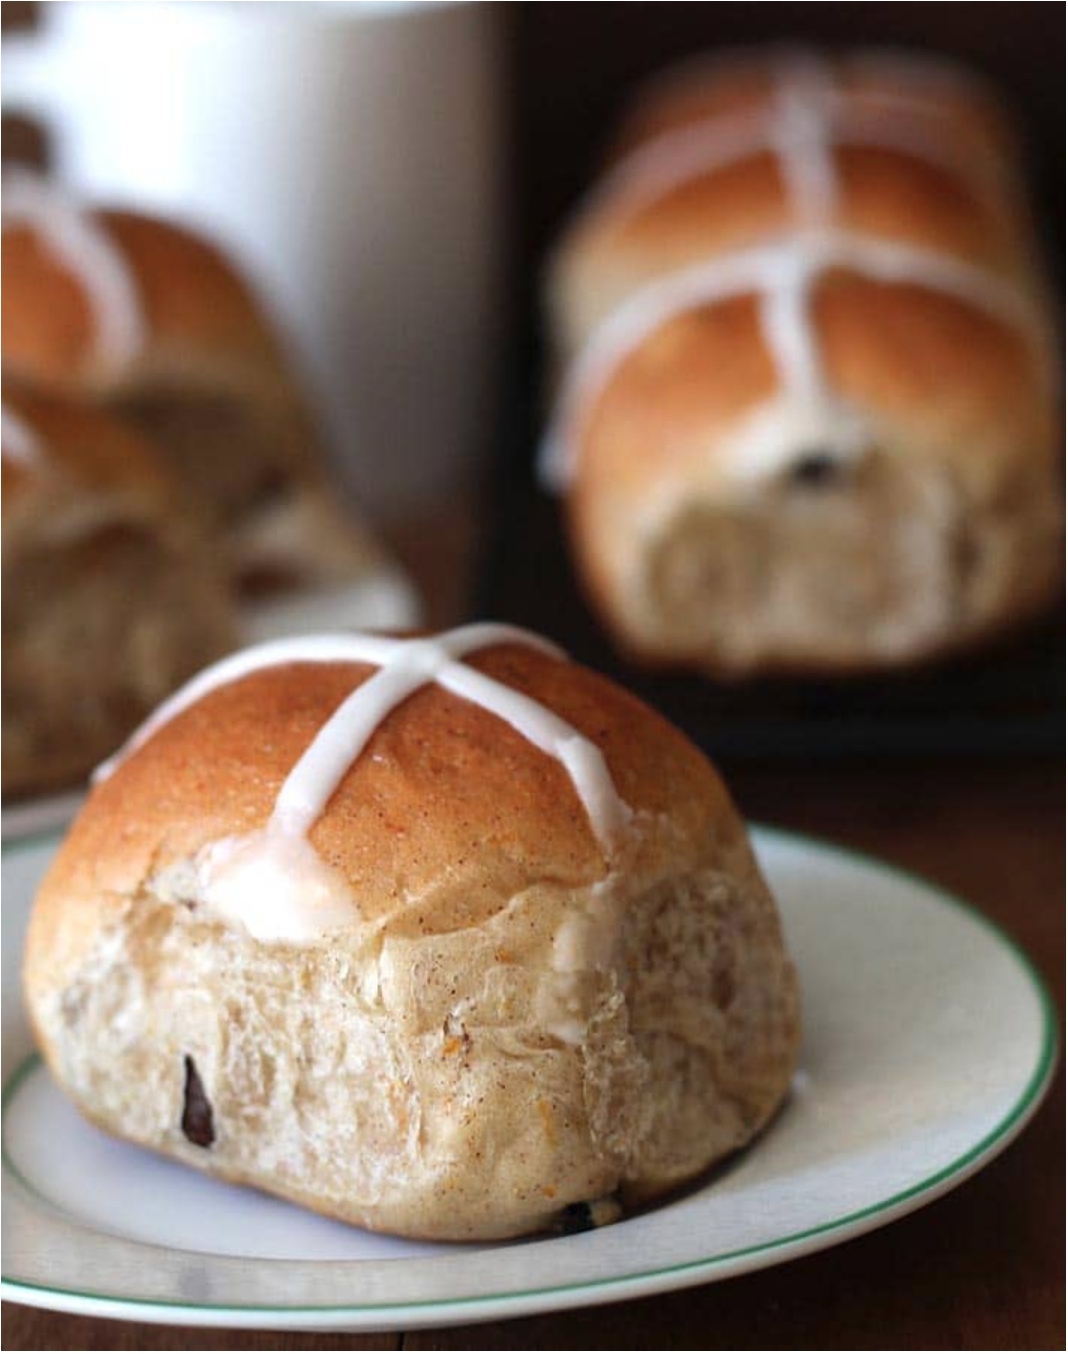 Hot cross buns with a white icing cross on top 